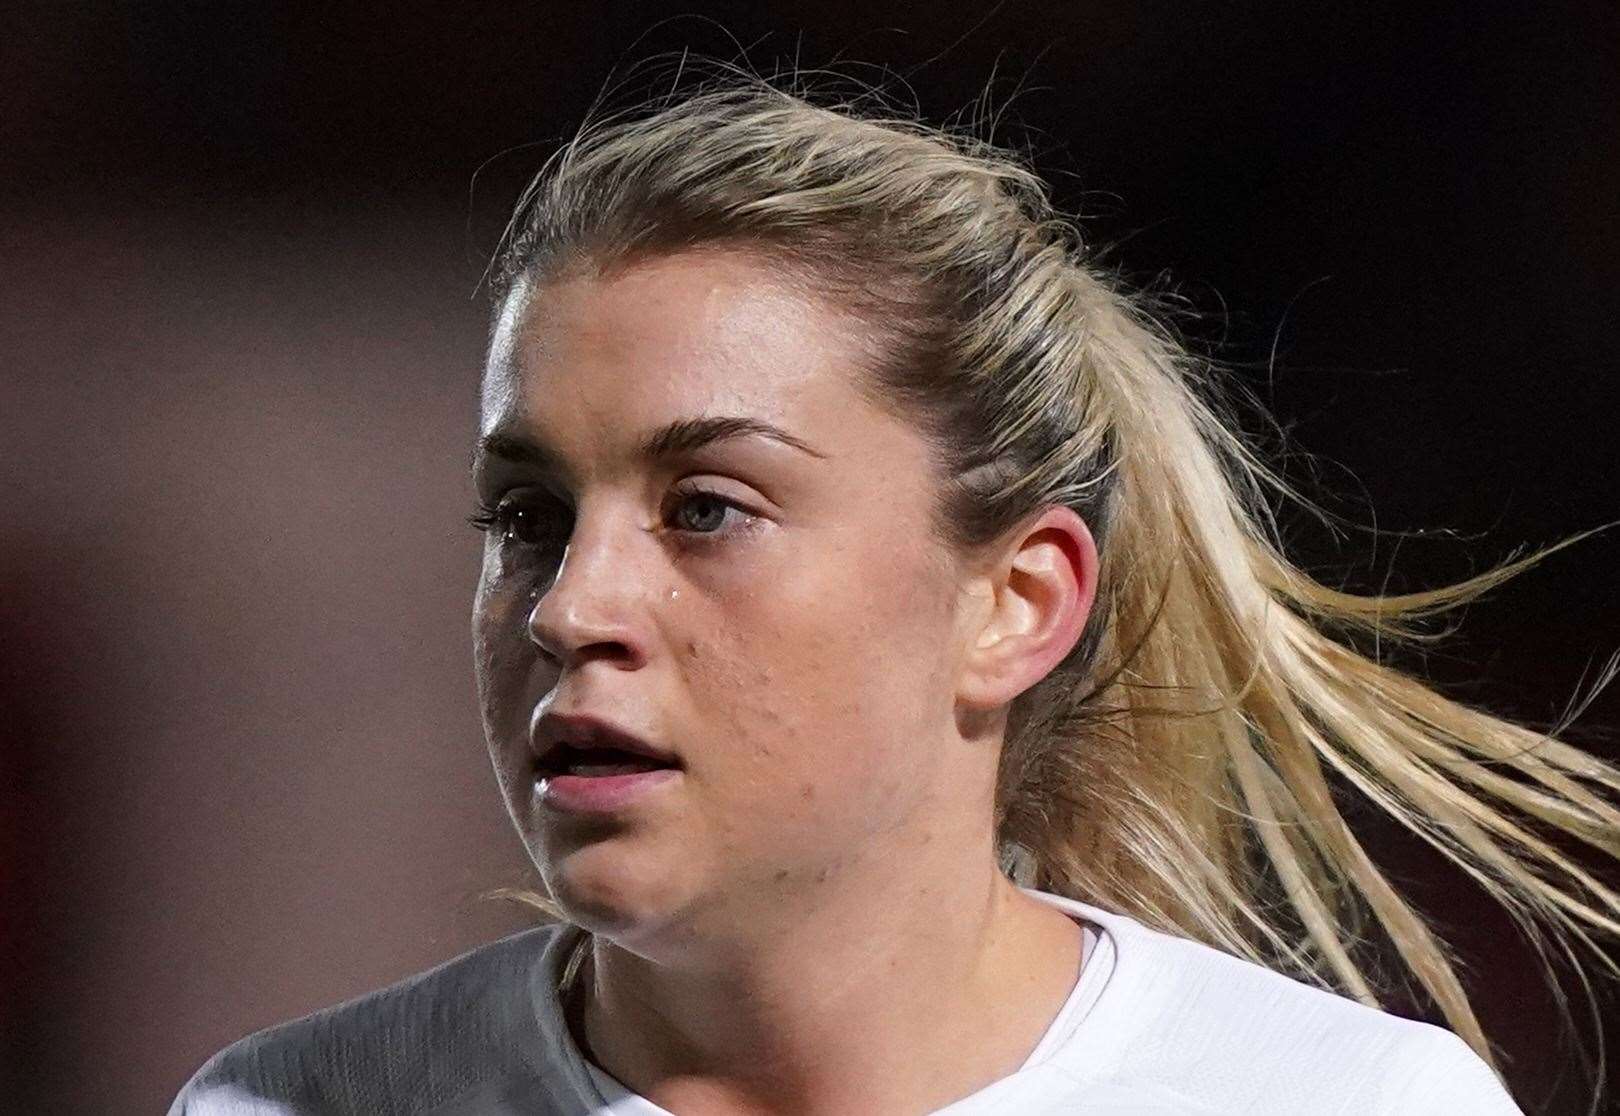 Maidstone-born striker Alessia Russo scored her first World Cup goal in a record-equalling 6-1 win against China on Tuesday. Picture: PA Images